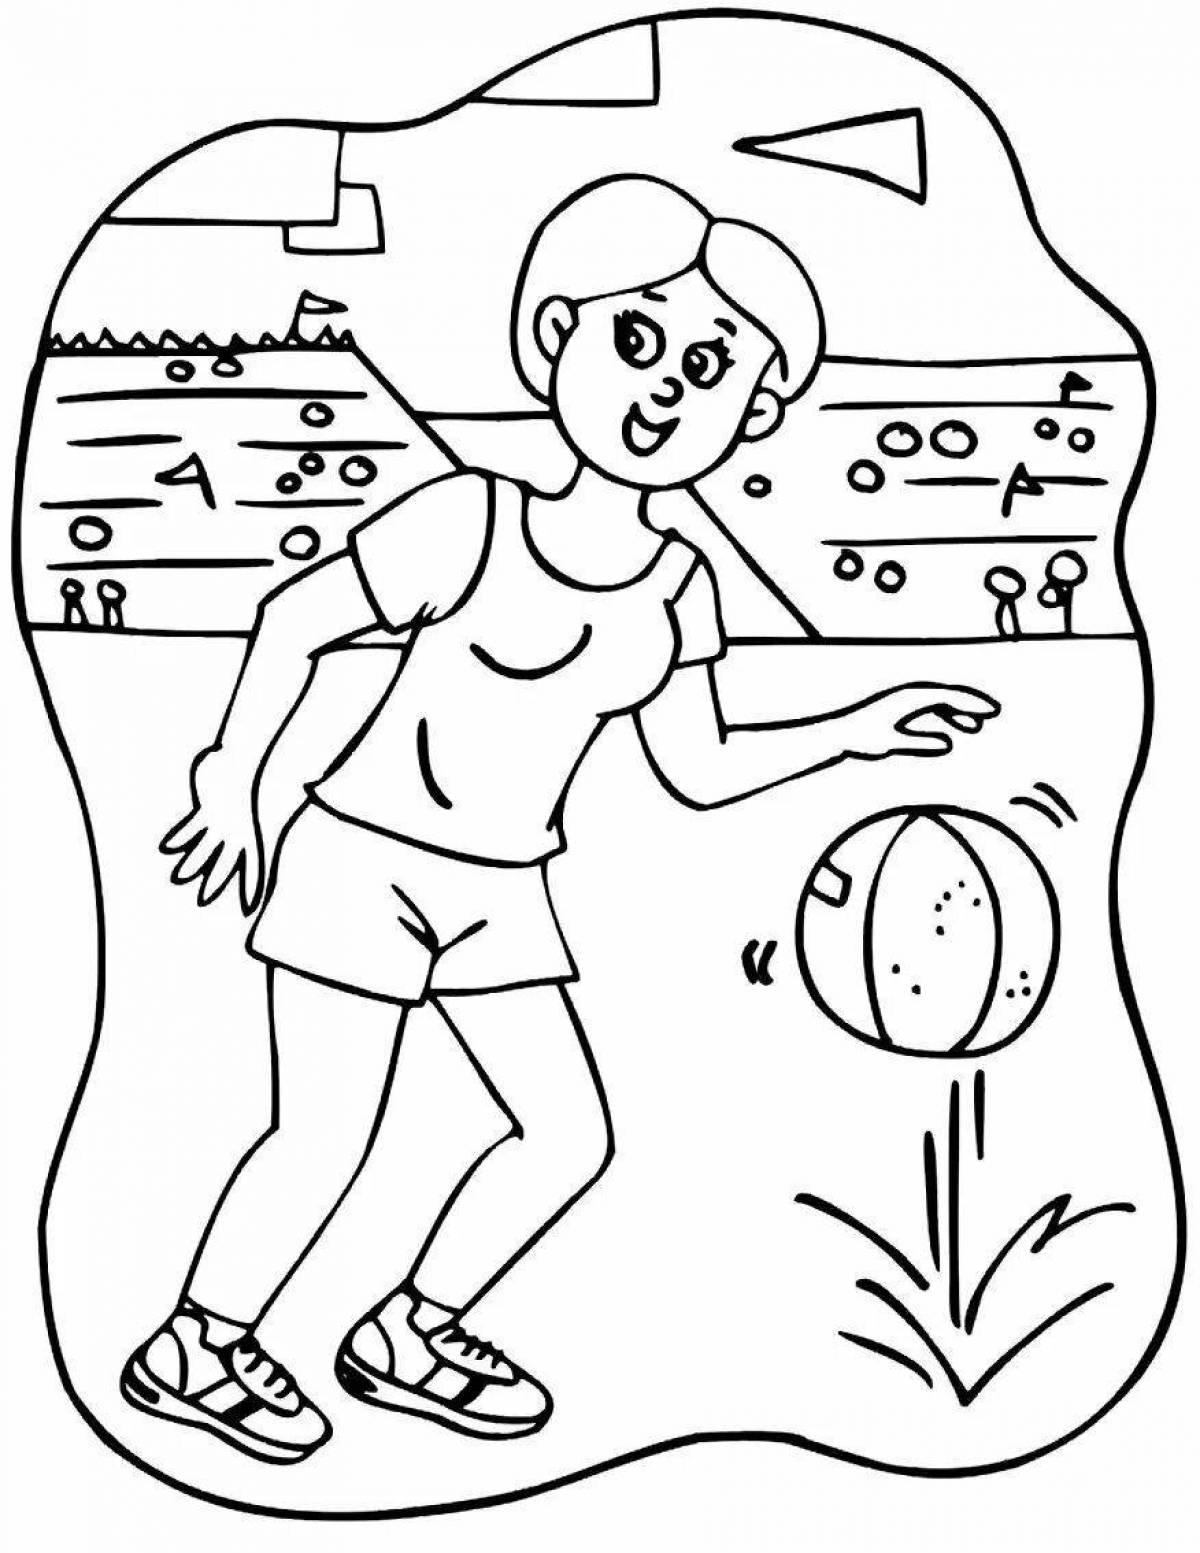 Playful health coloring page